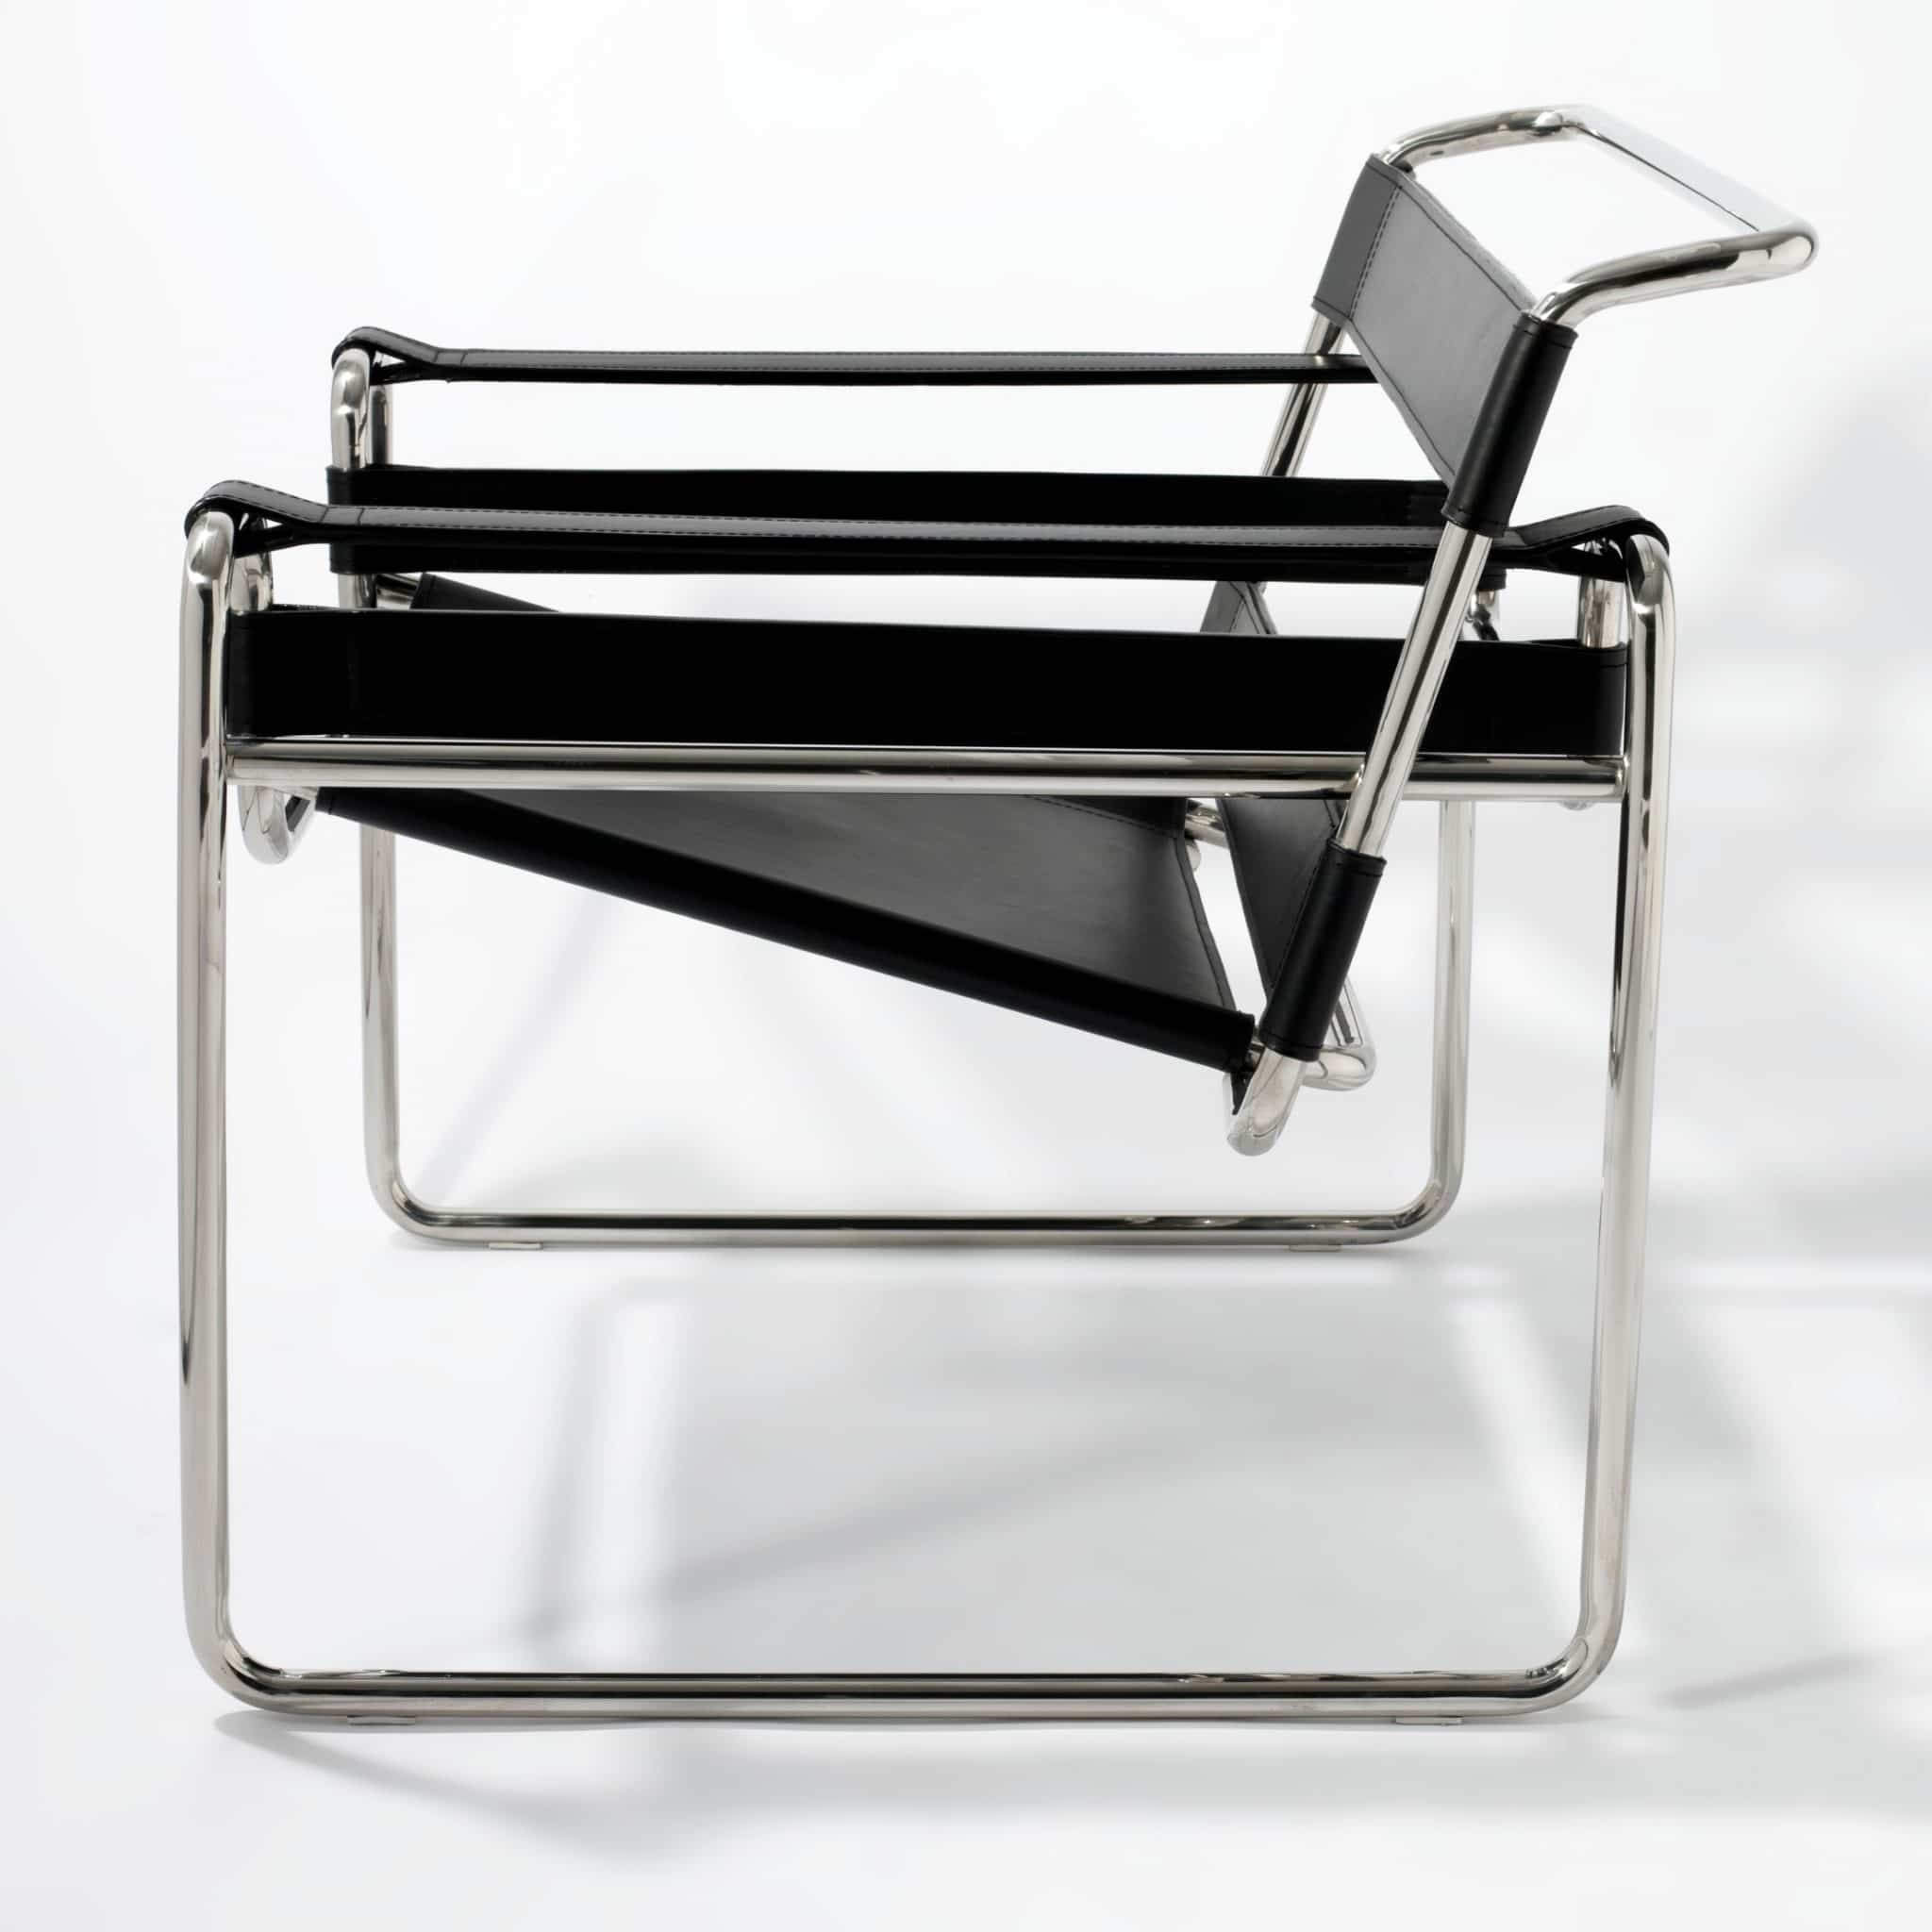 marcel_breuer_wassily_chair_black_pic2